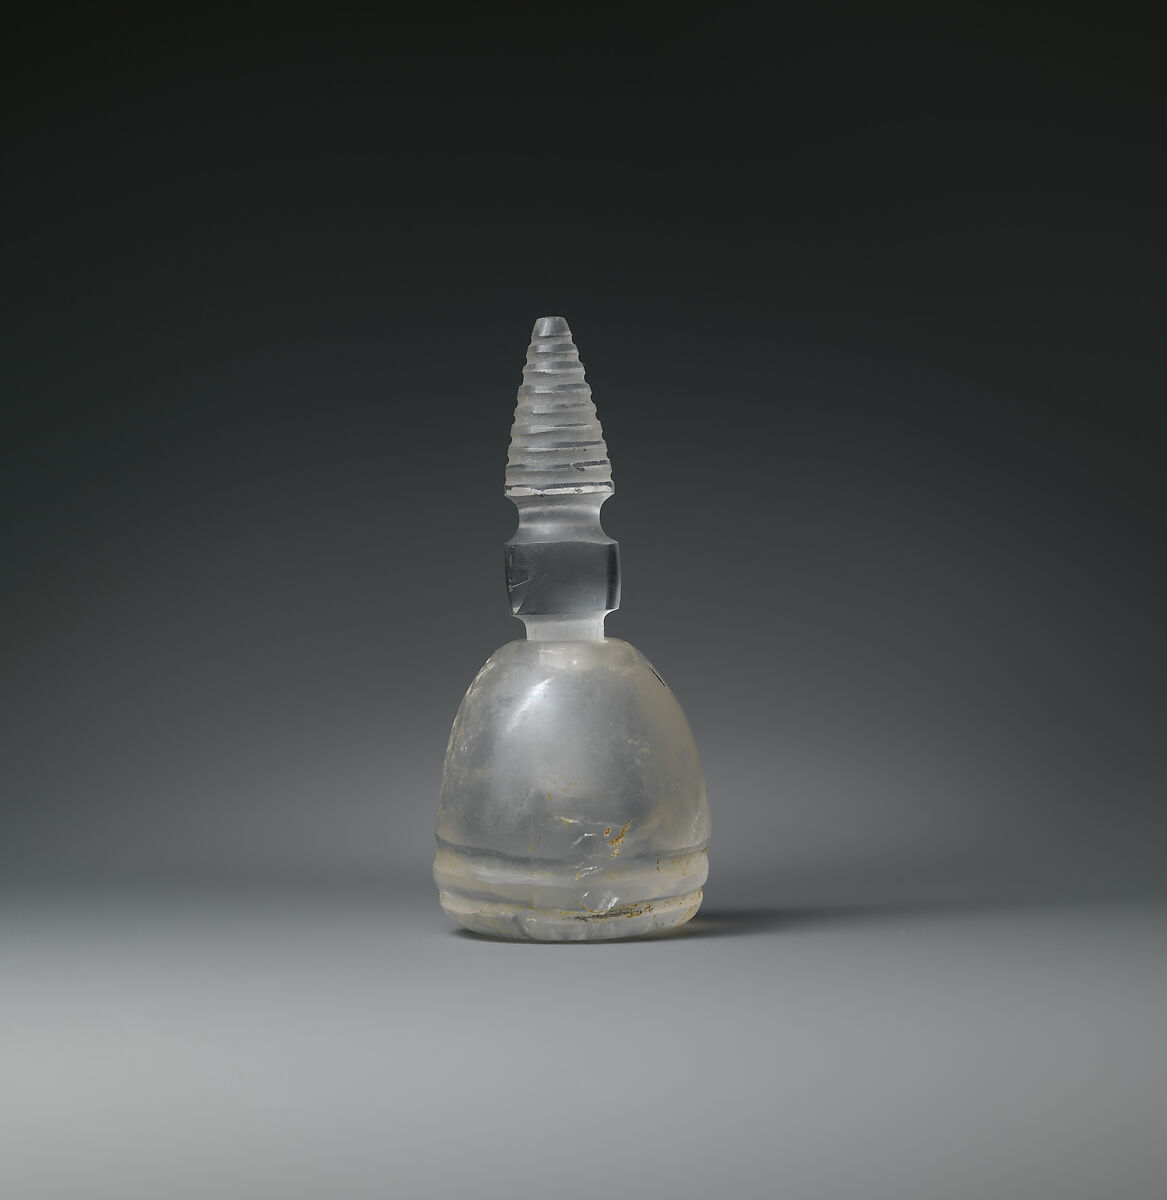 Reliquary  in the shape of a stupa, Rock crystal, Sri Lanka, central or western regions 